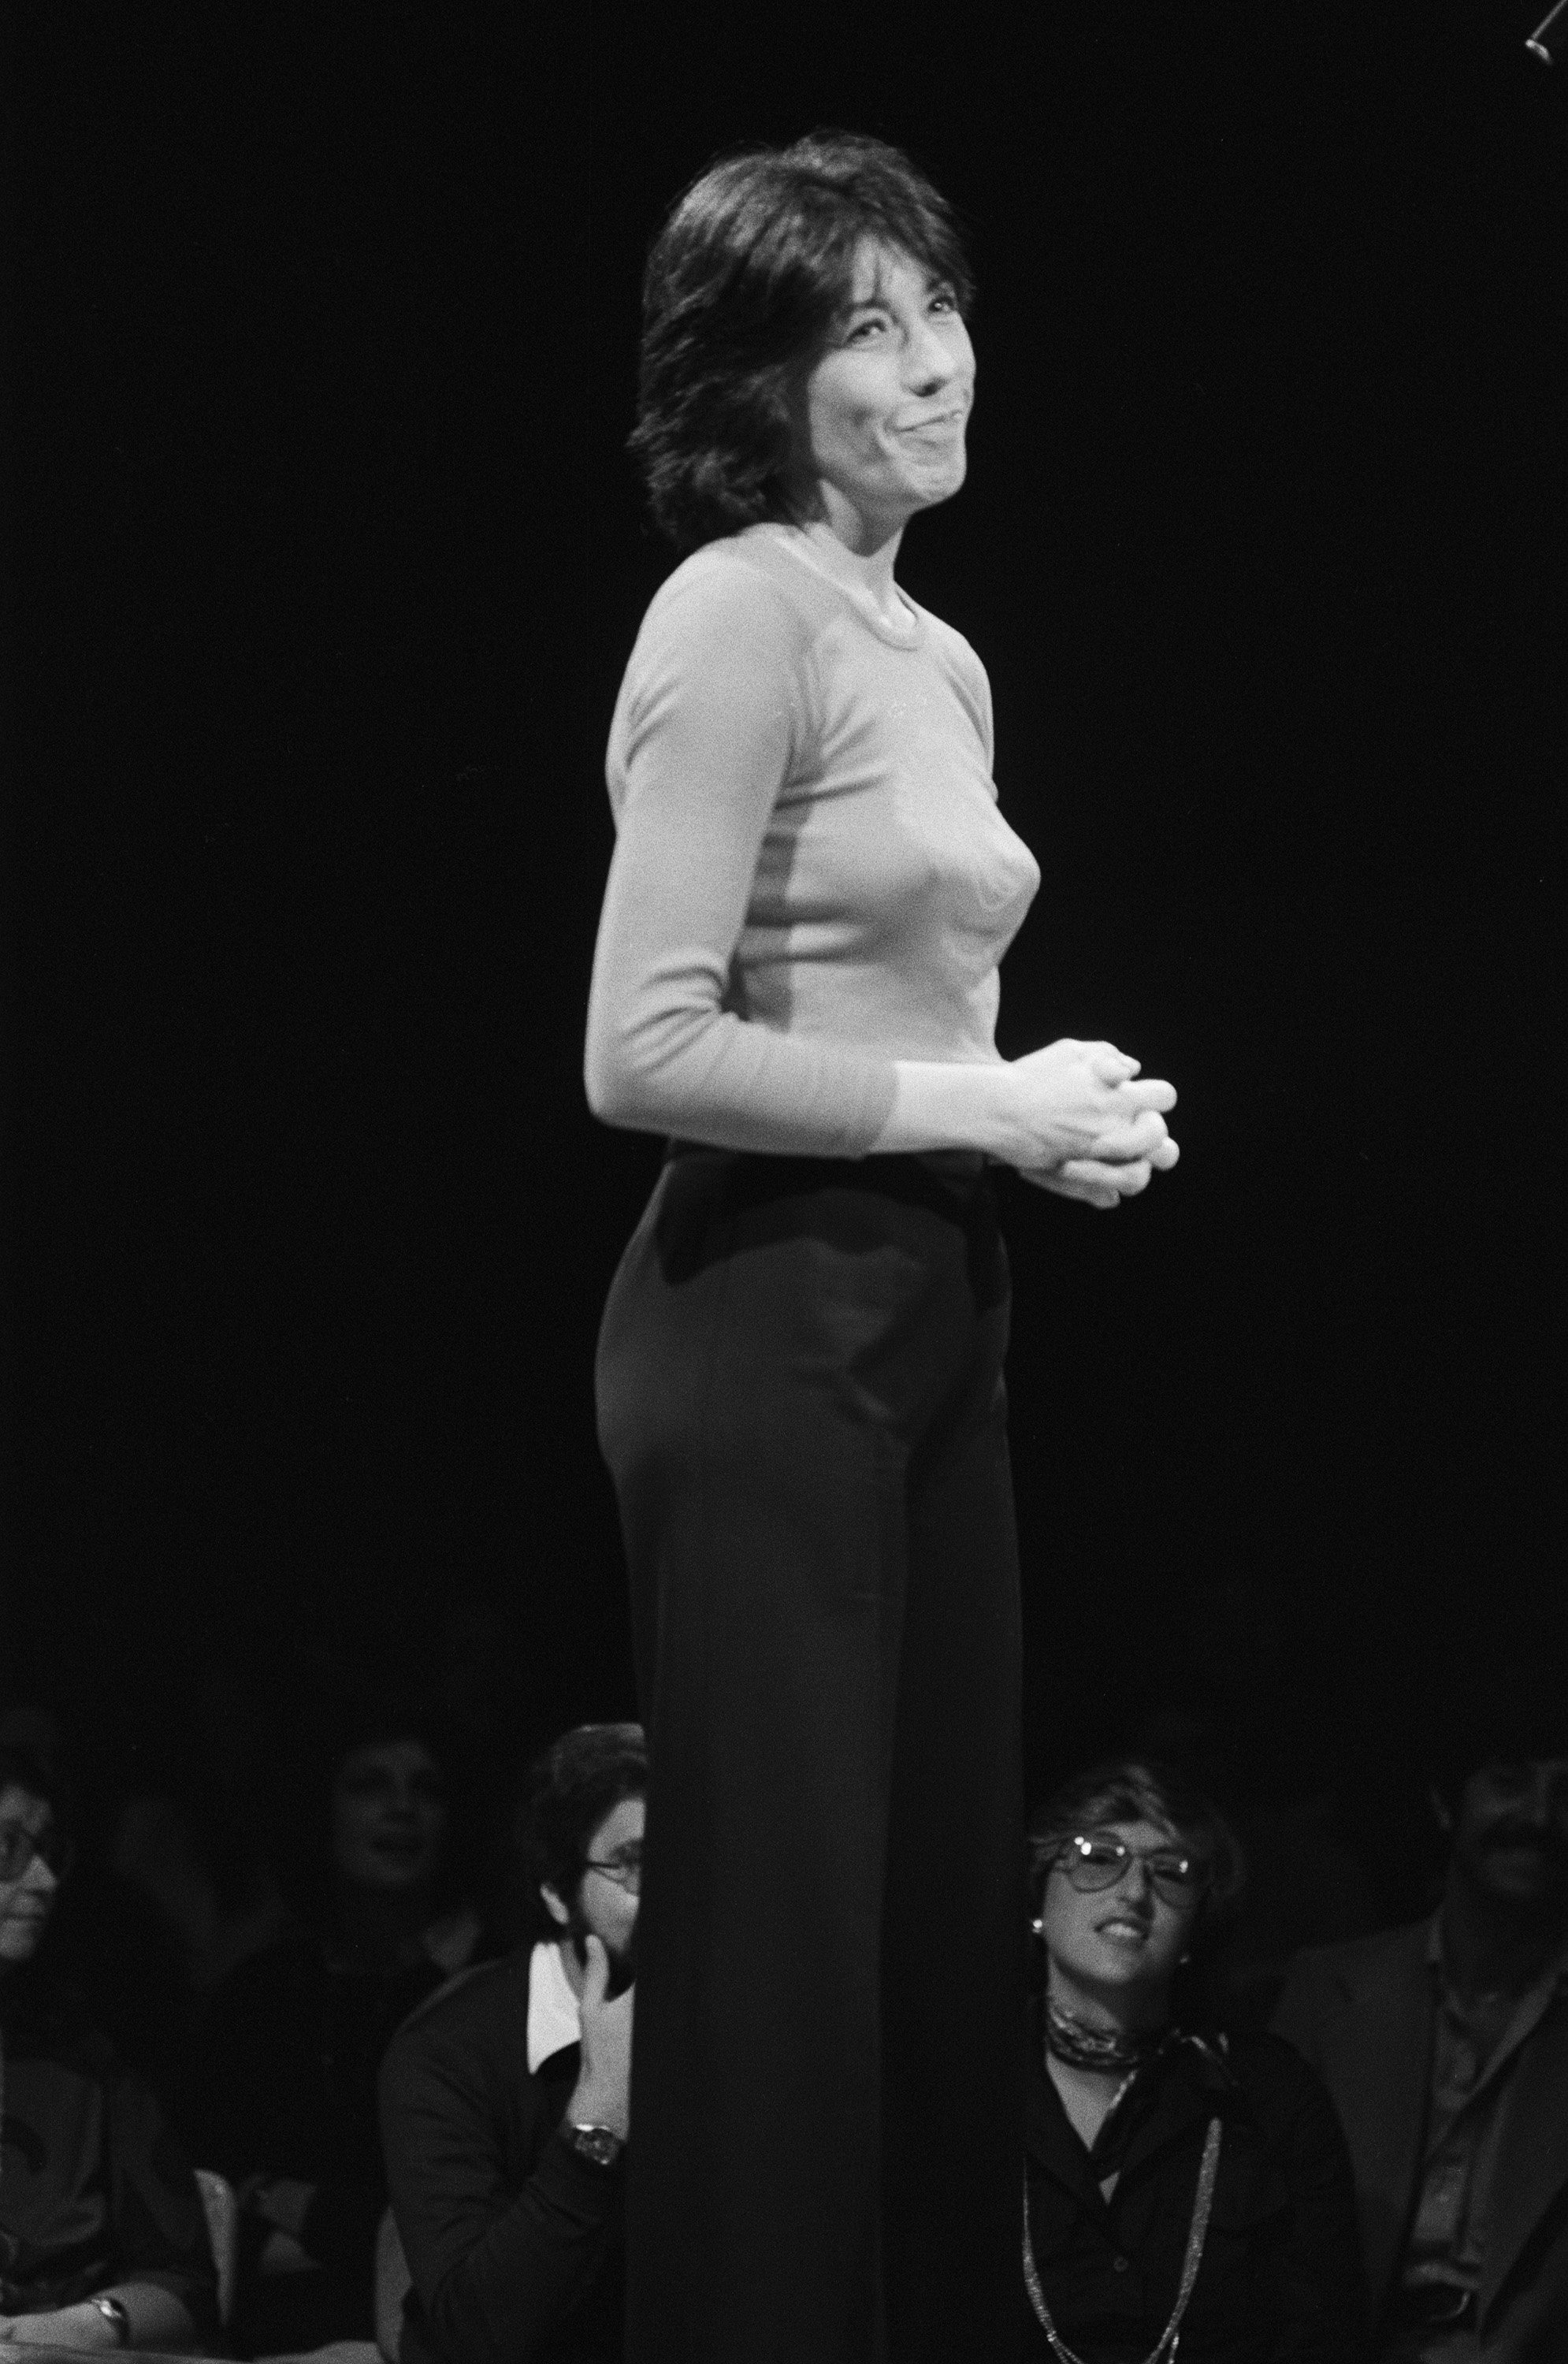 Lily Tomlin during her monologue on "Saturday Night Live" on September 18, 1976. | Source: NBCU Photo Bank/NBCUniversal/Getty Images